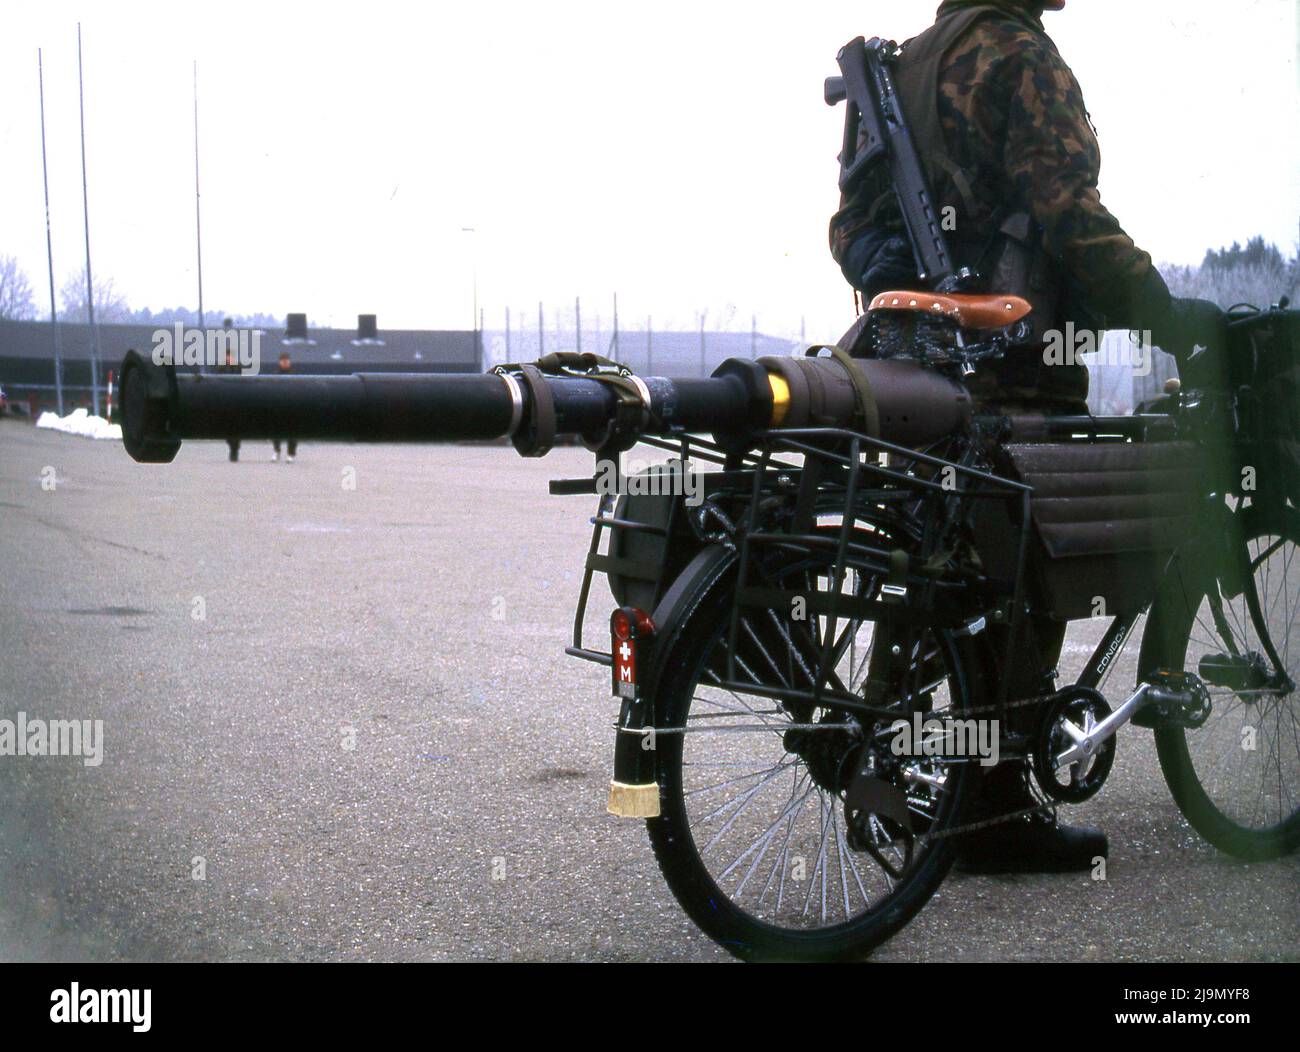 circa 2000, the Swiss army bicycle, MO-93, rear view, showing attached weapon, a bazooka and solider standing. The bicycle was the first major development on the original MO-05, which had introduced in 1905. The Swiss army bicycle or velo militaire has been a part of the national defence of Switzerland since then, as a form of transport, that if needed, enabled the military to move swiftly to defend against any invading forces. It's use dates back to 1891 and although there was talk in 2001 of phrasing them out, a new Swiss Army bike, the MO-12 was introduced in 2012. Stock Photo